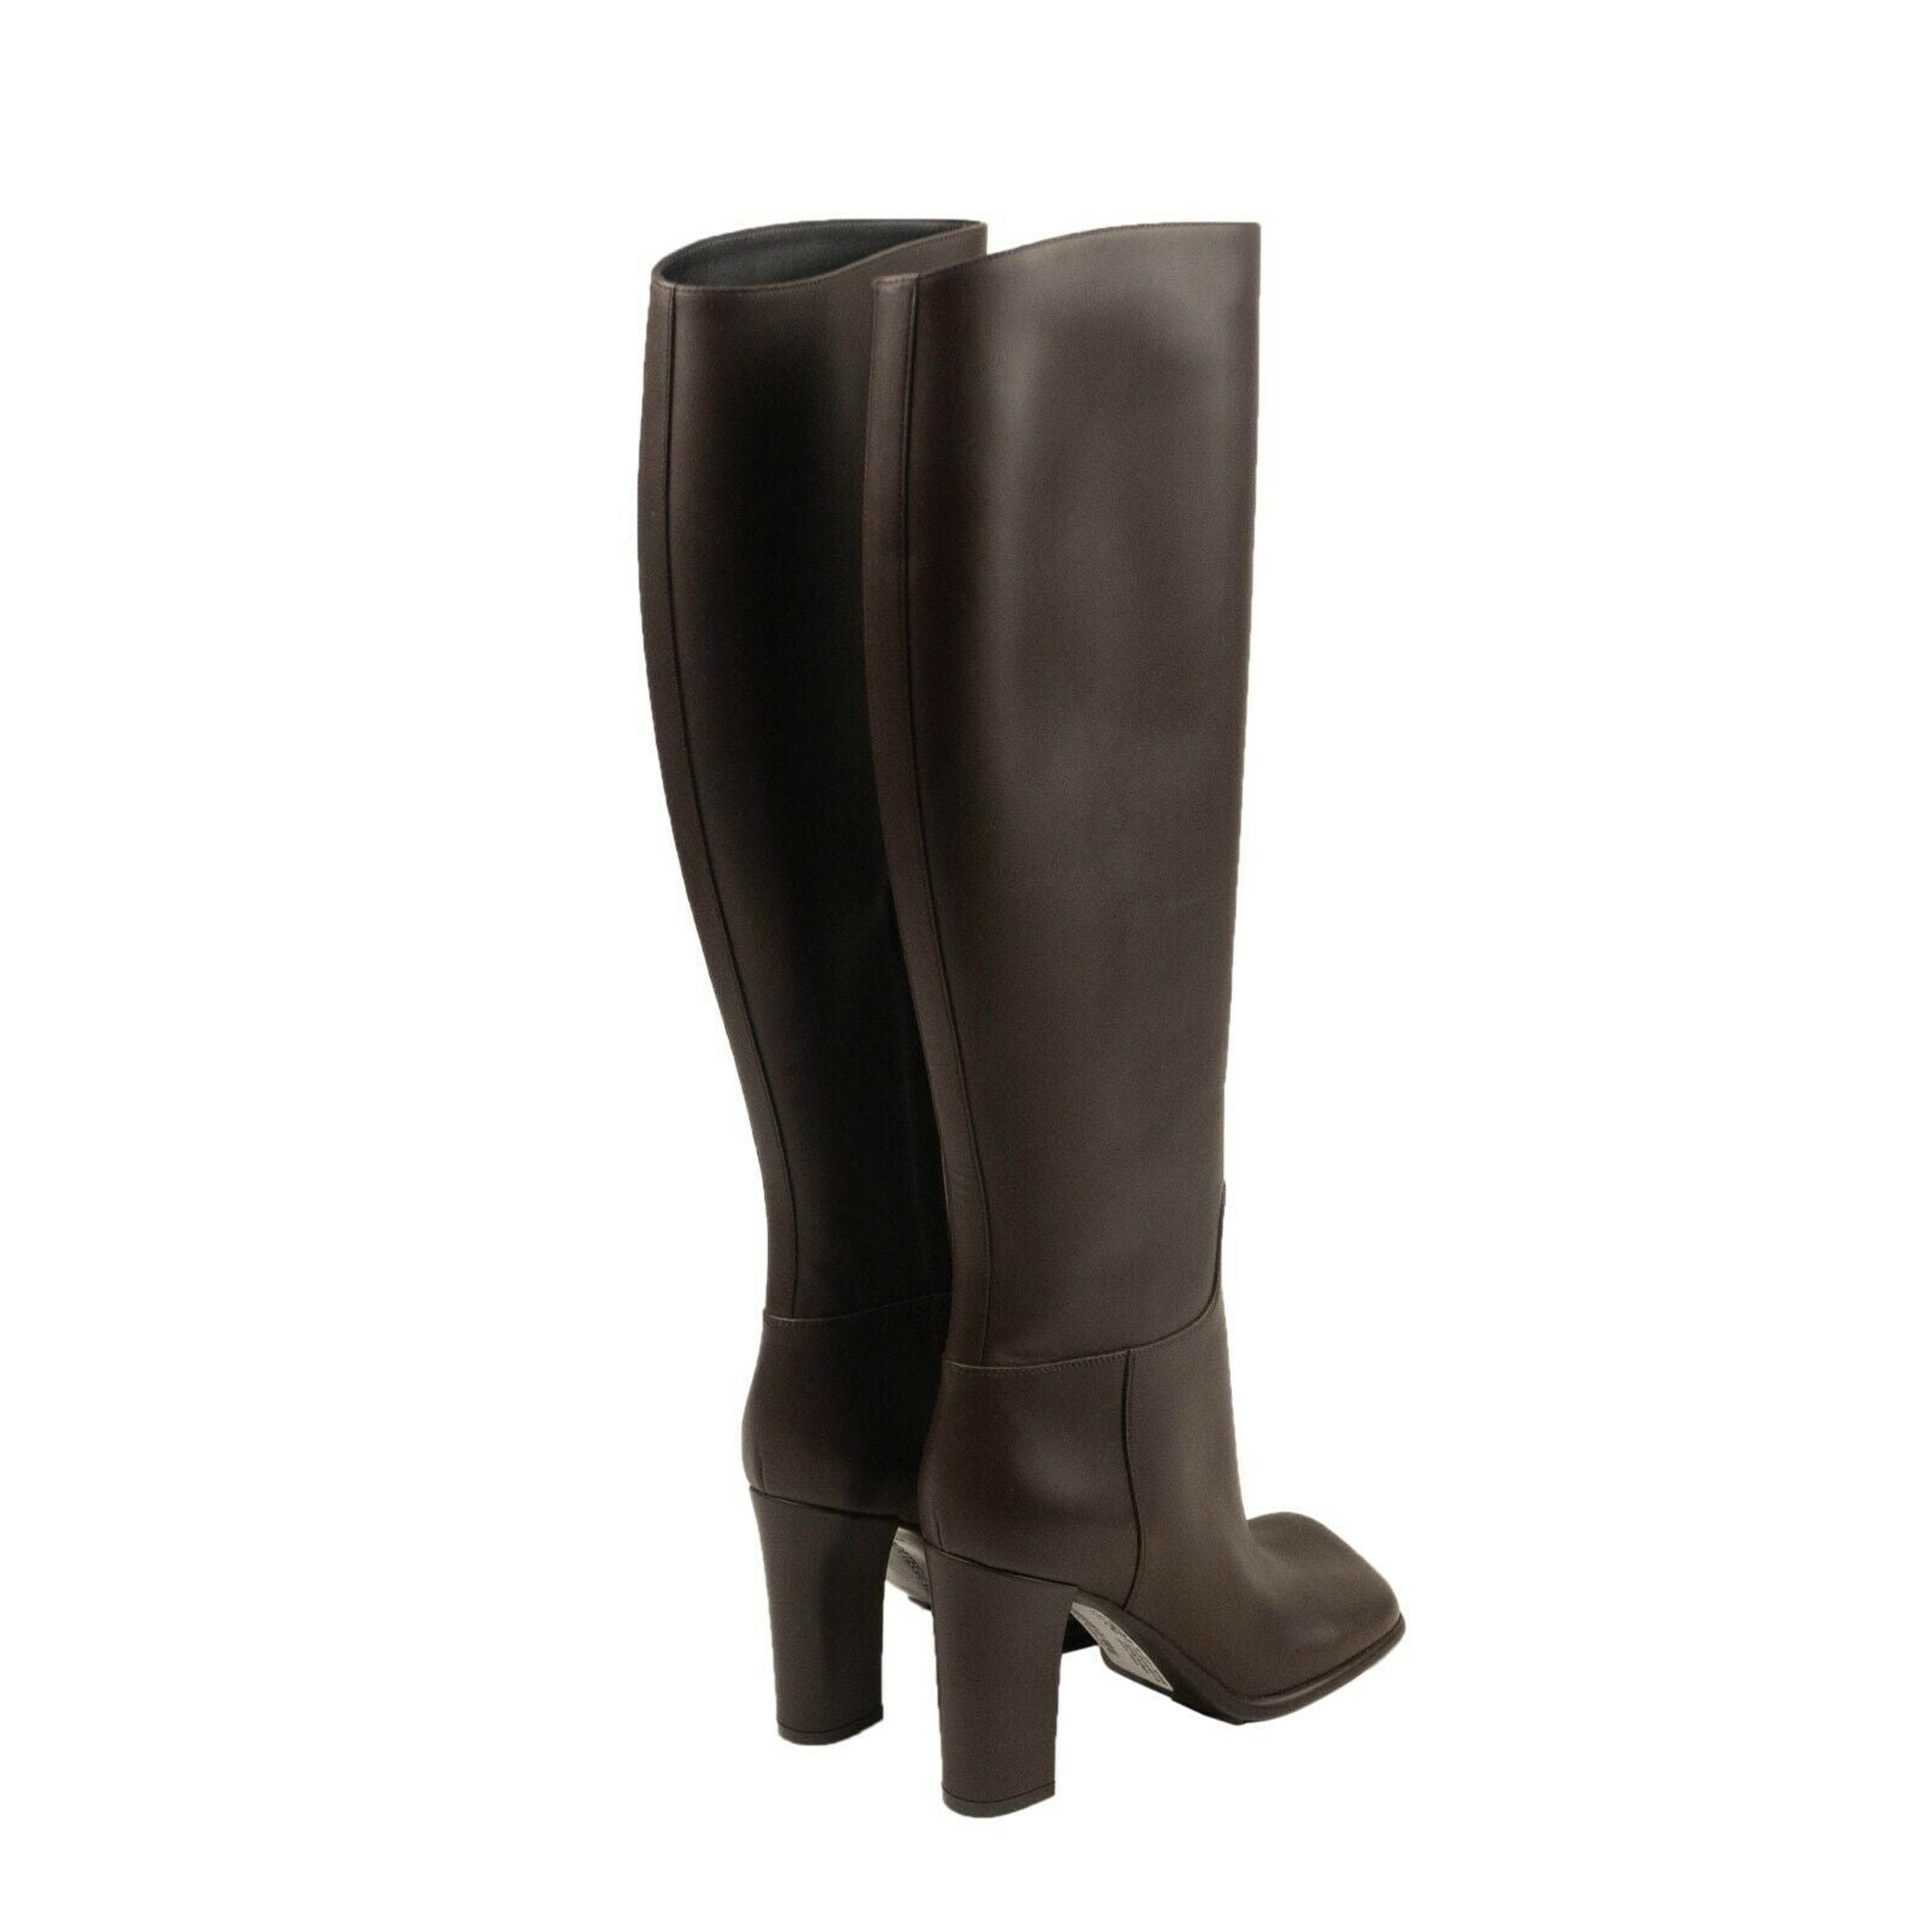 Alternate View 3 of Brown Storm Square Toe Knee High Boots